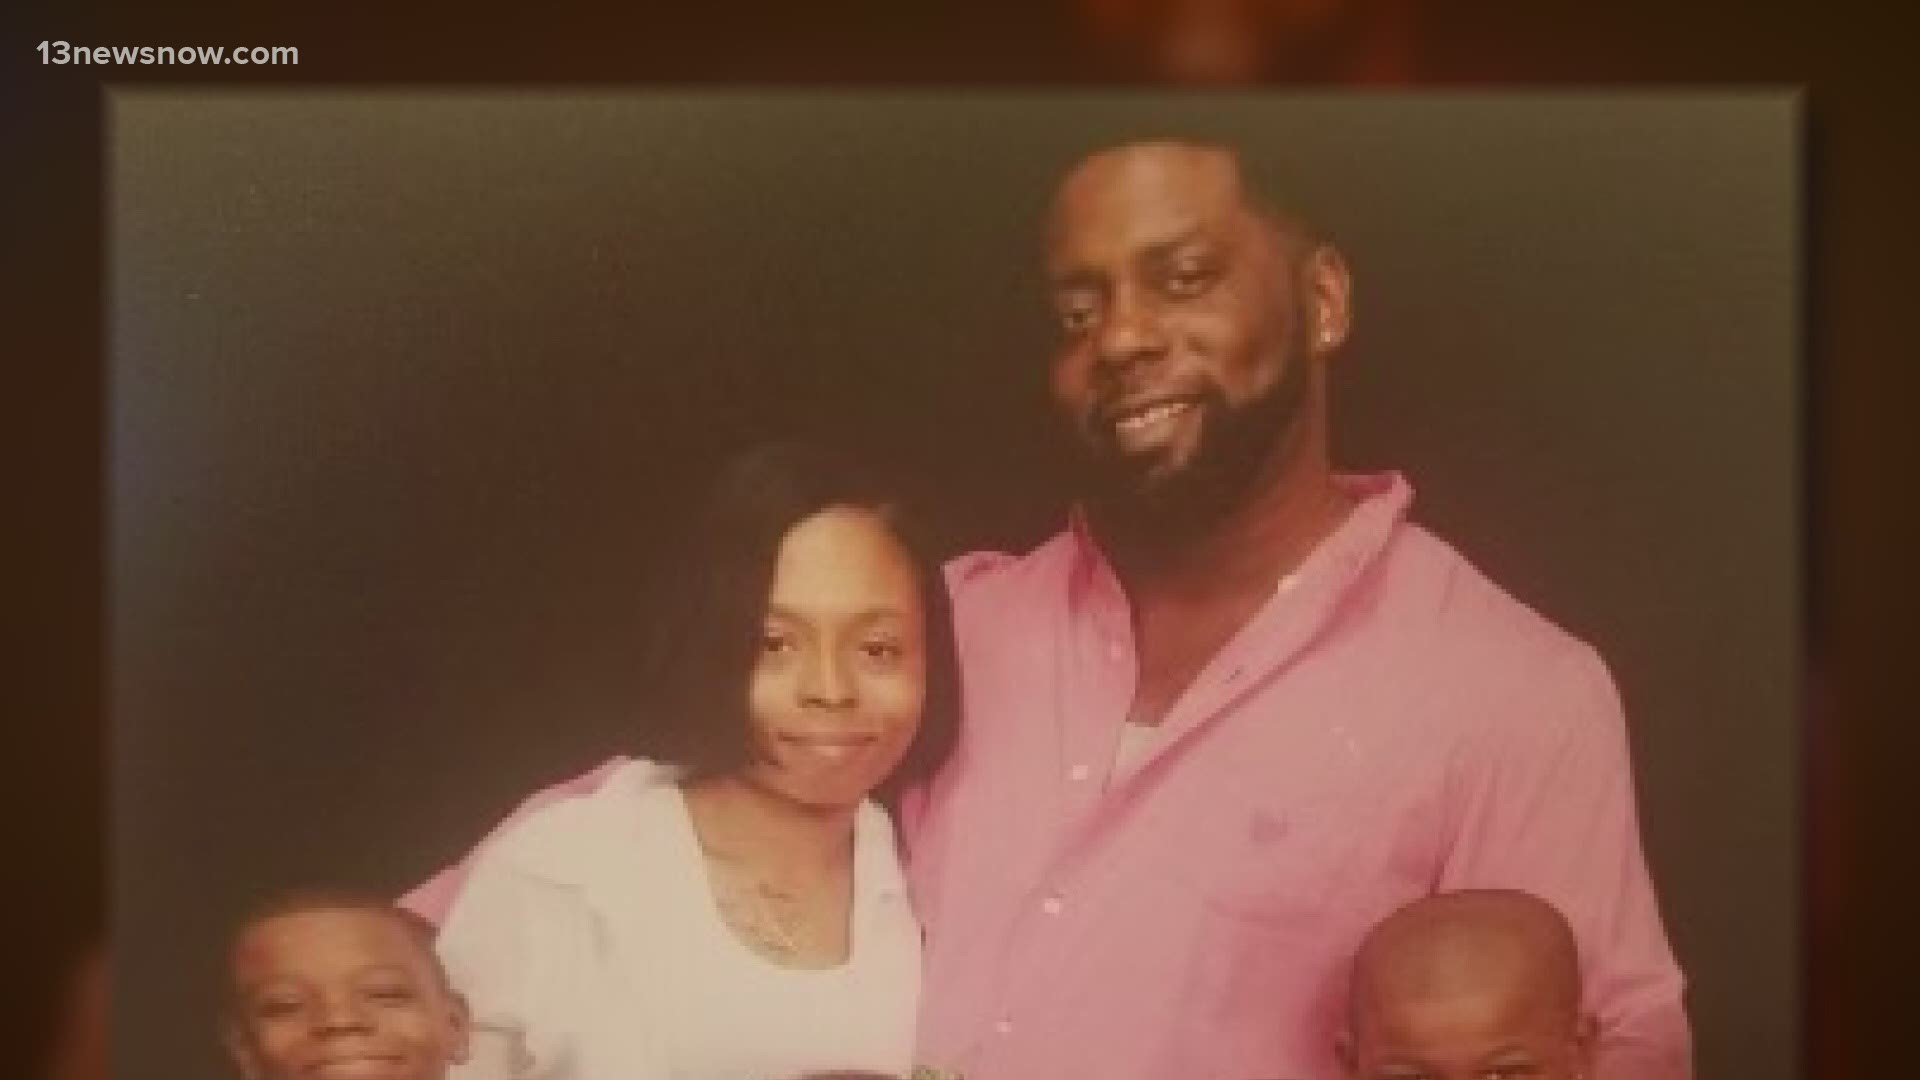 A judge filed a court order that allows Andrew Brown Jr.'s family to watch more body camera videos showing the day Brown was killed by deputies.